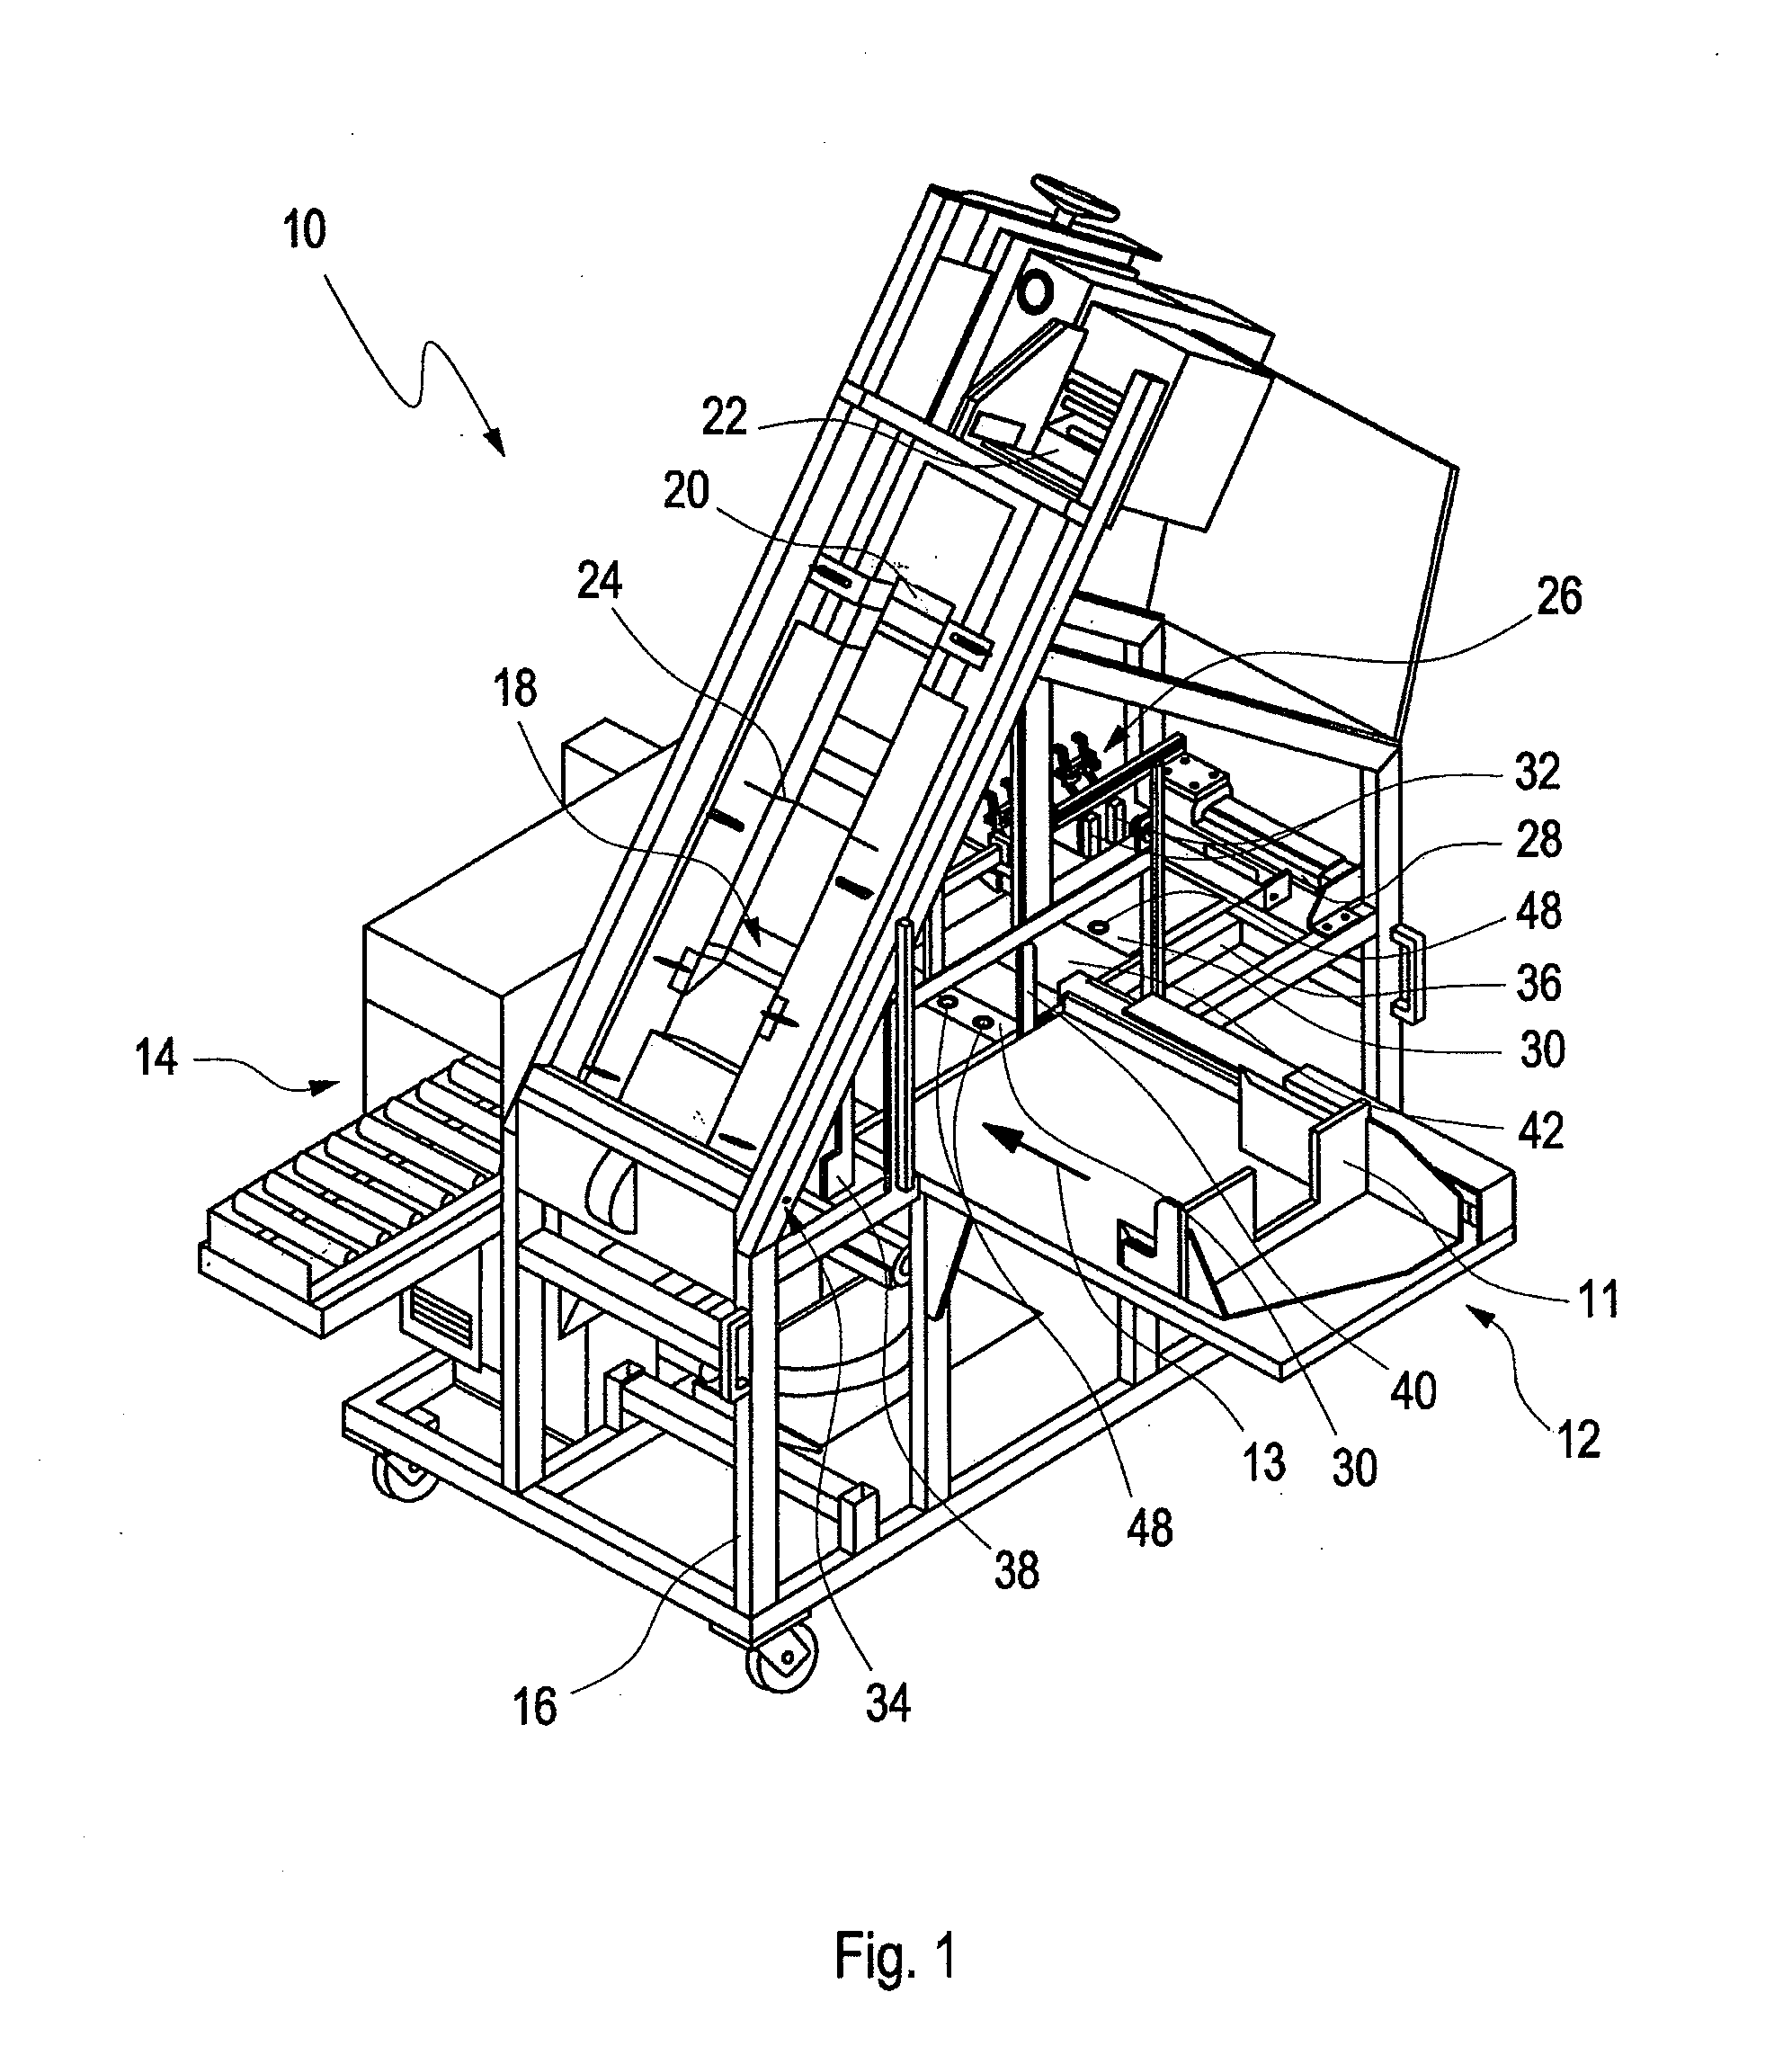 Apparatus for packaging flat articles